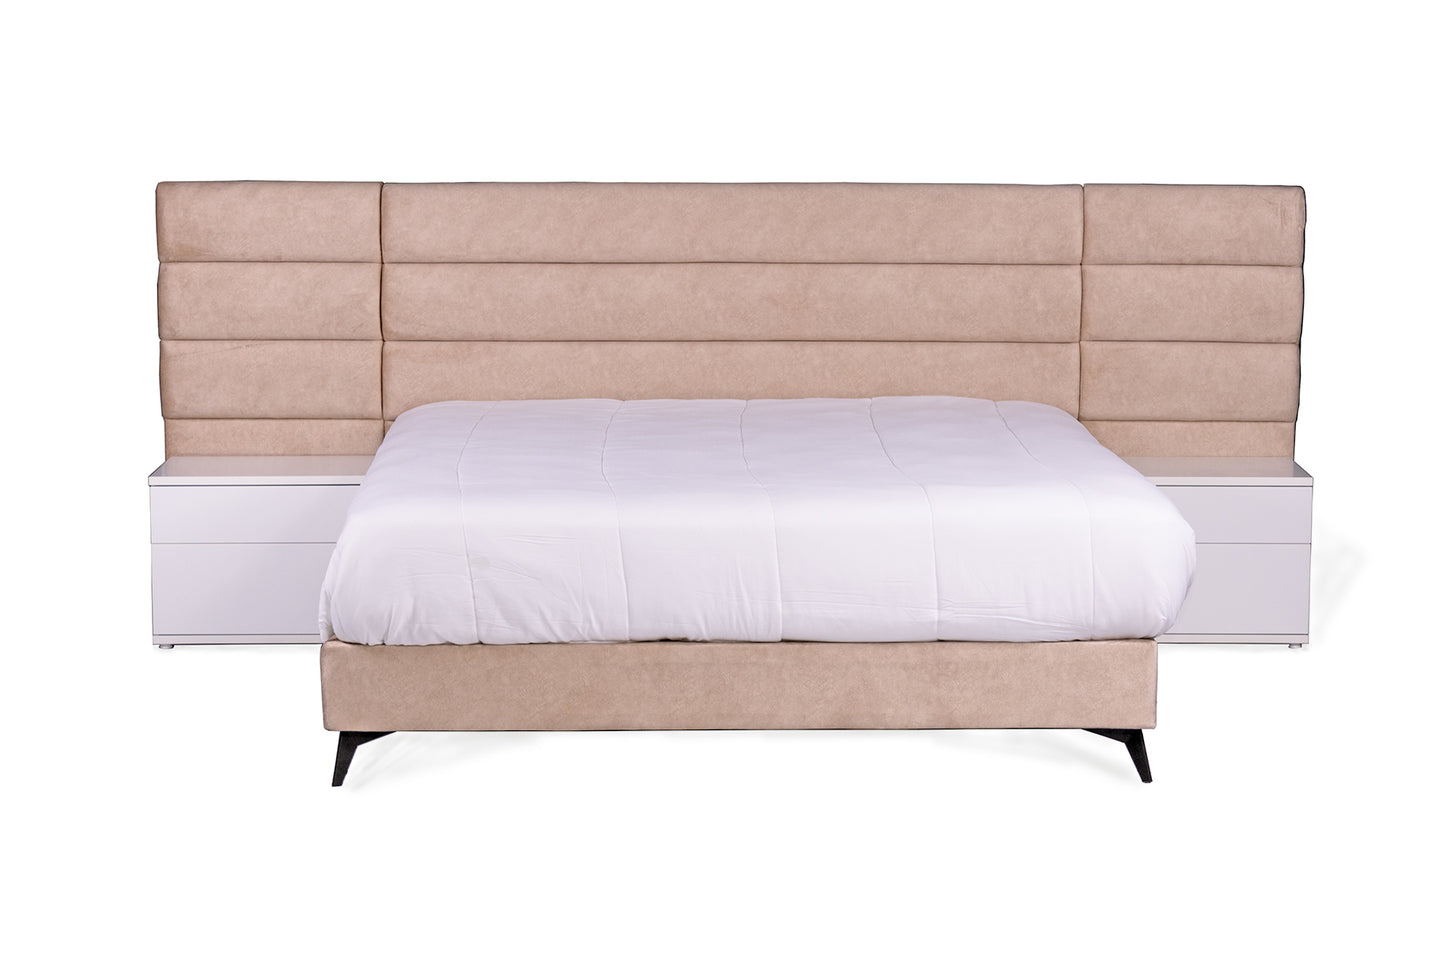 Upholstered sleigh bed in beige velvet. White wood pedestals are included in price.